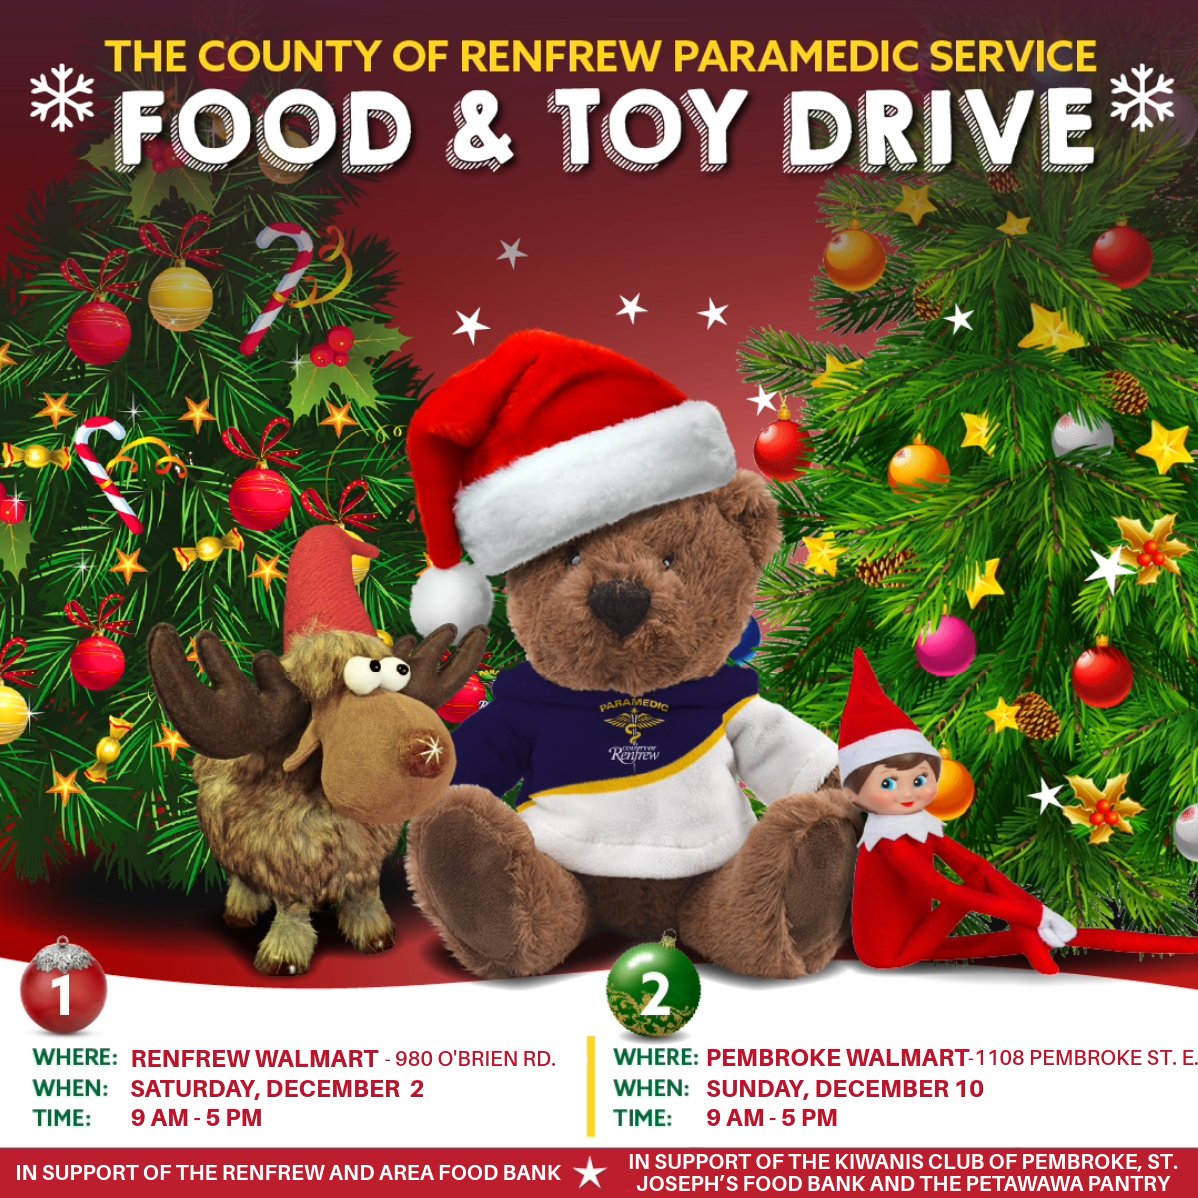 .@RenCtyParamedic hosting annual Food & Toy Drive in support of local organizations that assist families across Renfrew County. Paramedics will be set up at Renfrew Walmart Saturday, Dec 2 9am-5pm and again Pembroke Walmart on Sunday, Dec 10 9am-5pm. Money, food & toys accepted!